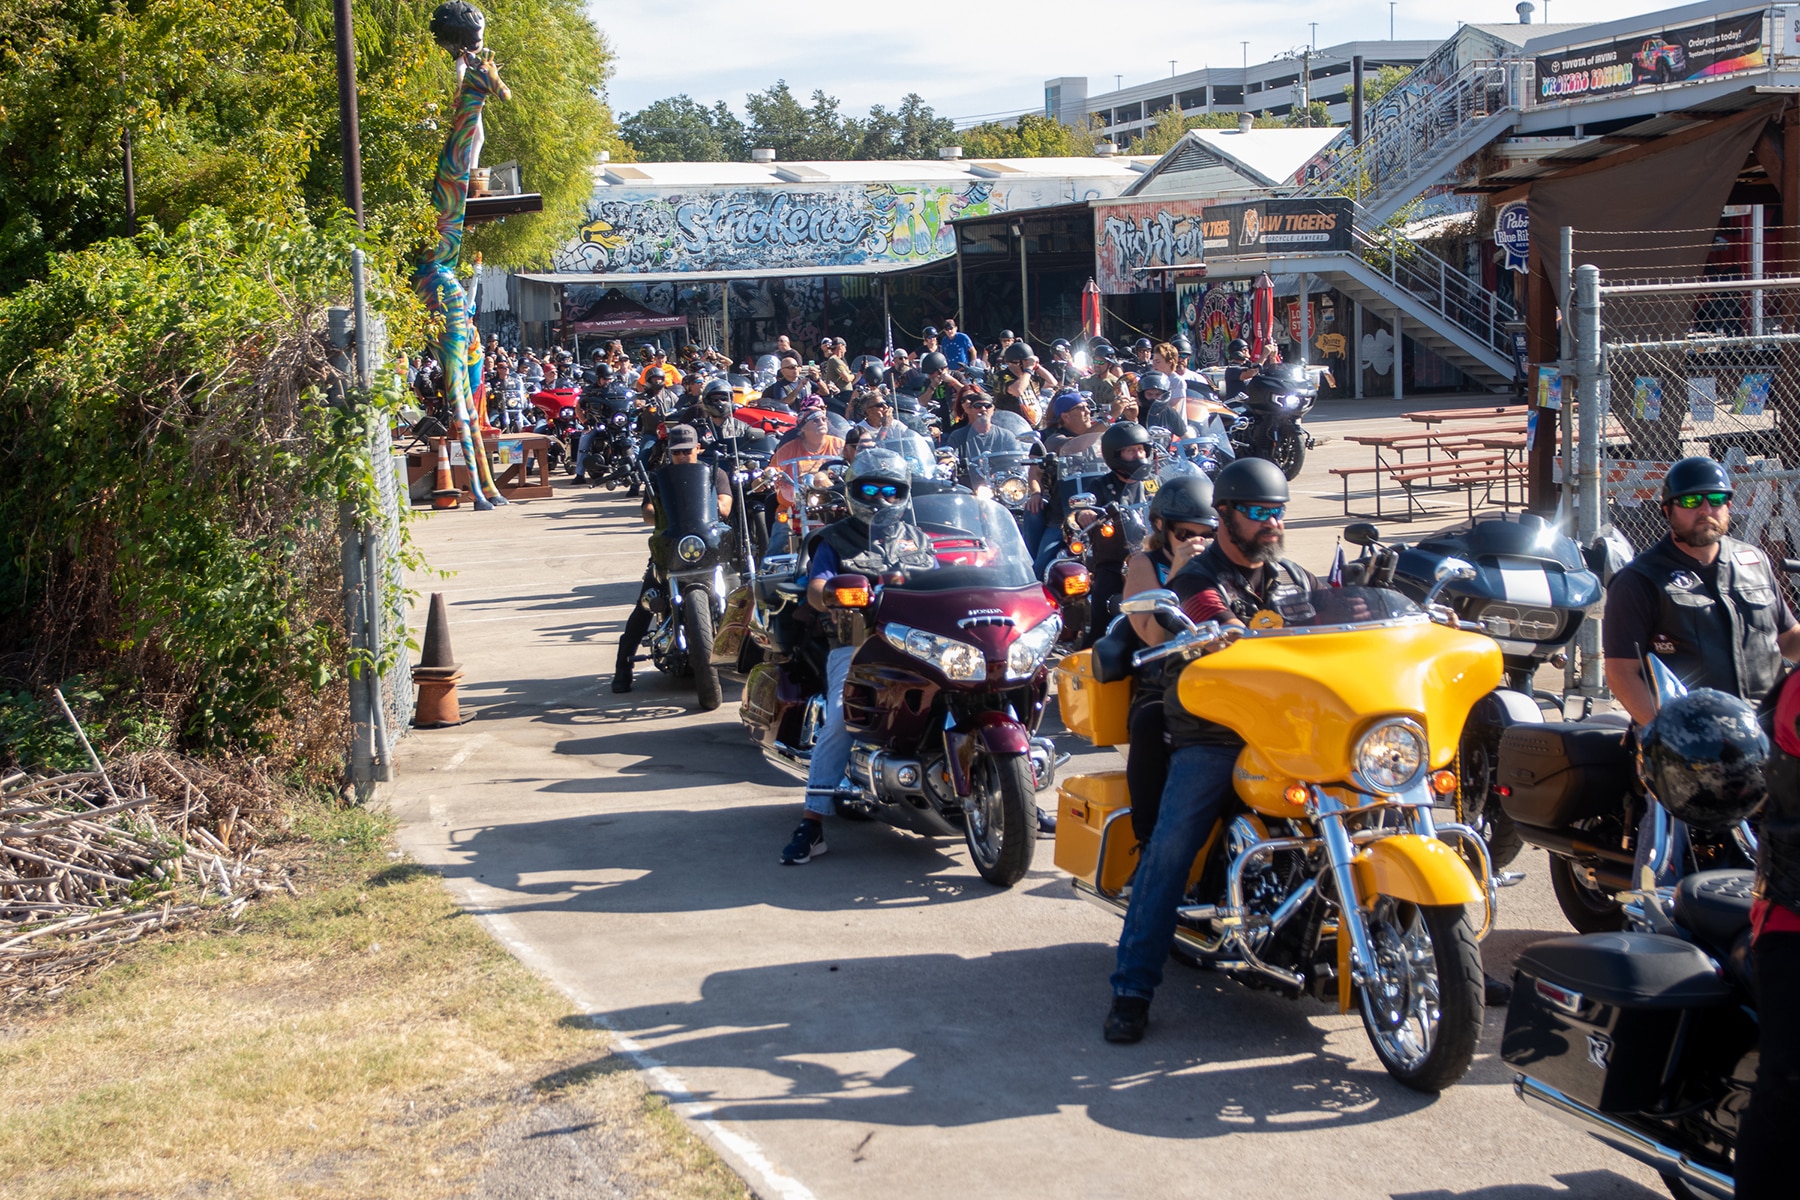 Support Local Veterans in the 12th Annual Spirit of a Hero Ride in Dallas, TX.